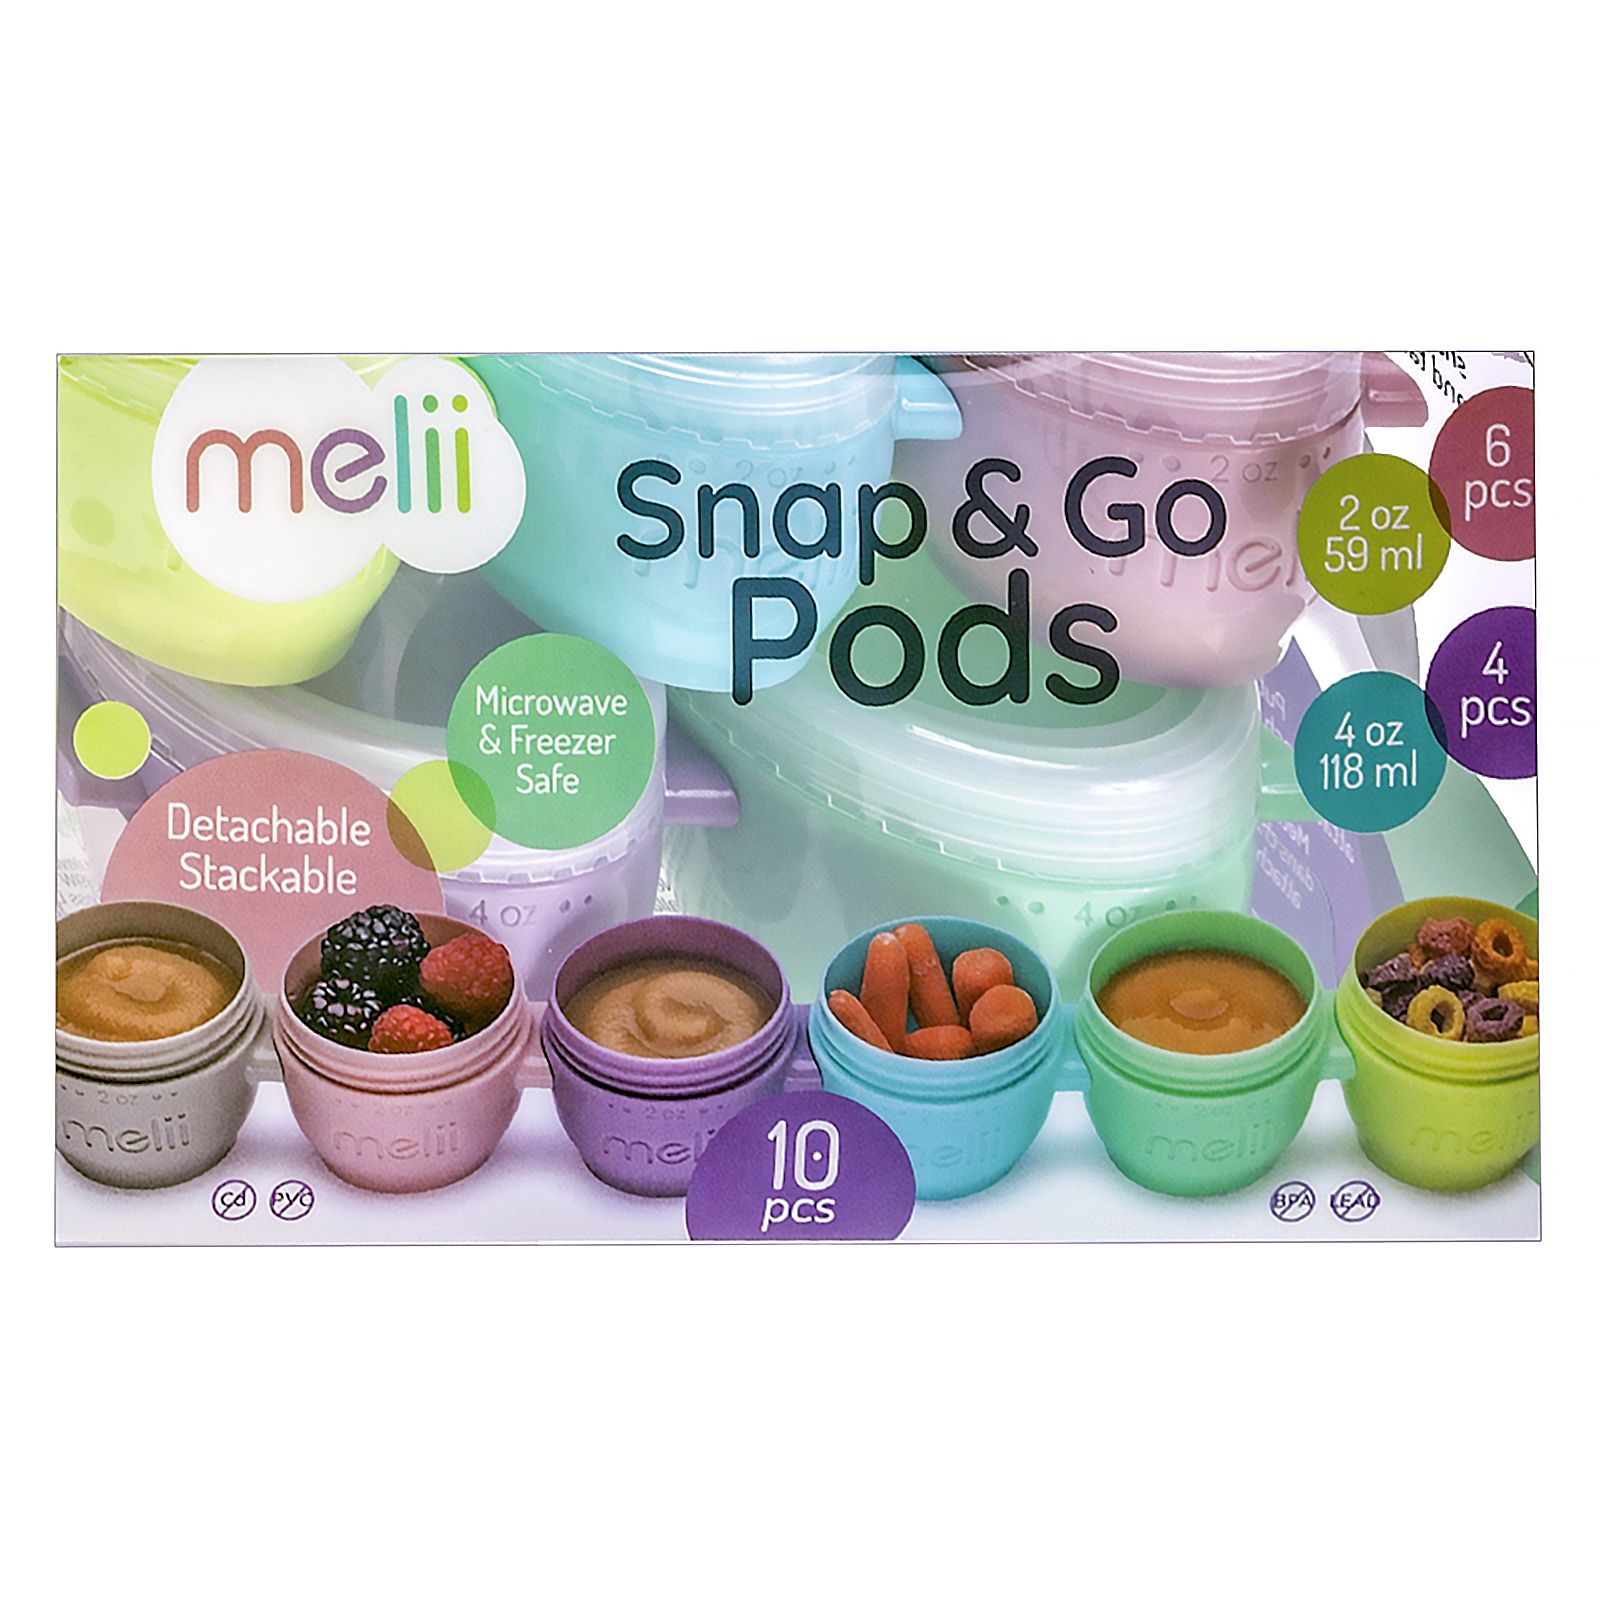 A fun and cute way to carry your kids' snacks! The Melii Animal